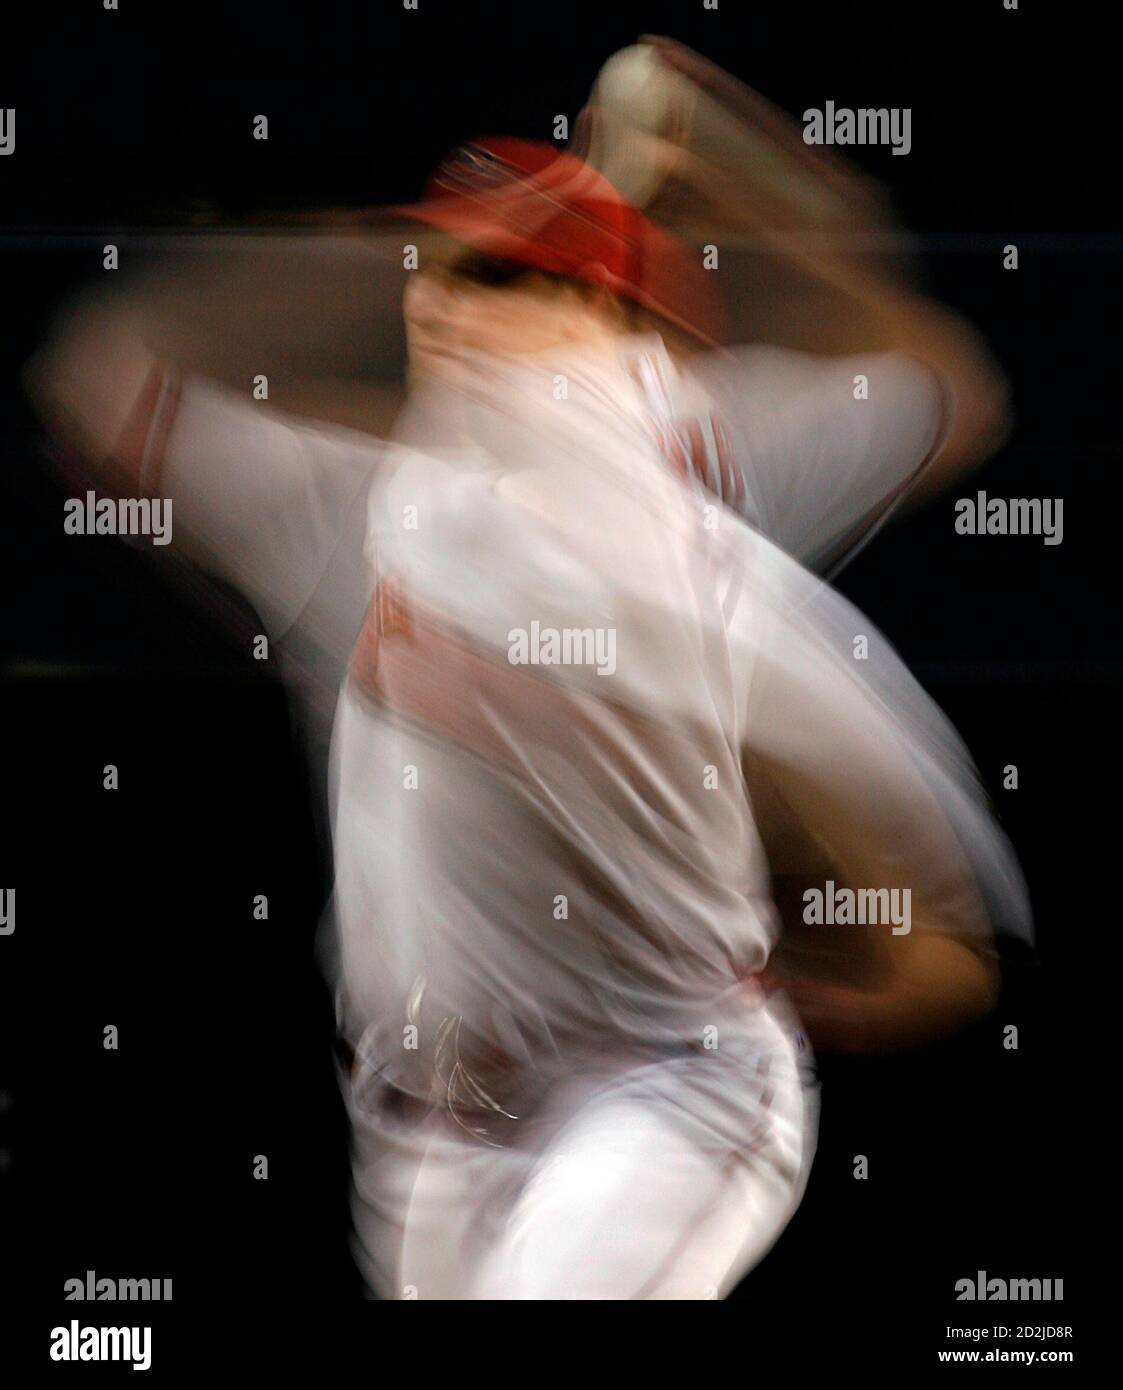 Arizona Diamondbacks starting pitcher Brandon Webb, the 2006  National League Cy Young award winner, is a blur as he faces the San Diego Padres in the fifth inning during National League baseball game in San Diego, California April 18, 2007 .     REUTERS/Mike Blake       (UNITED STATES) Stock Photo